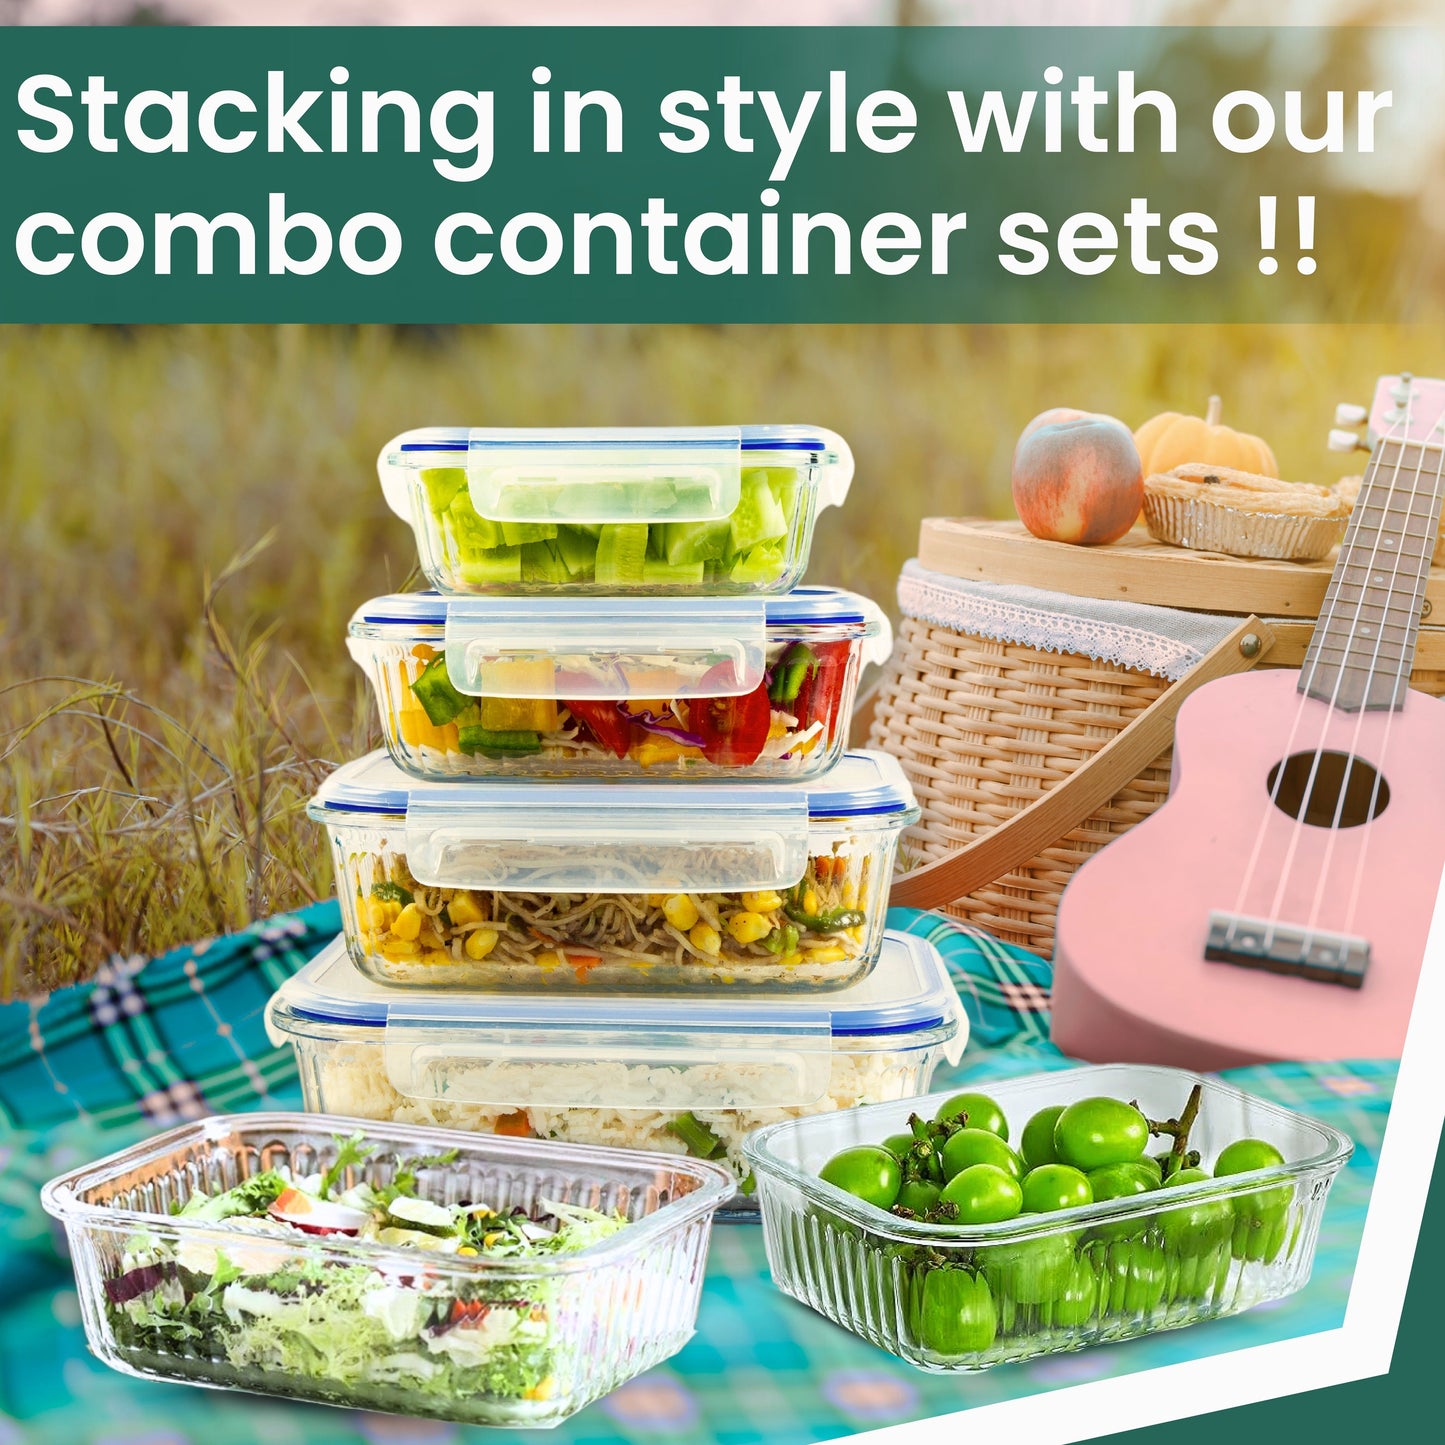 Truly Eco Oblong Borosilicate Glass Containers Combo Set - 370ml and 640ml